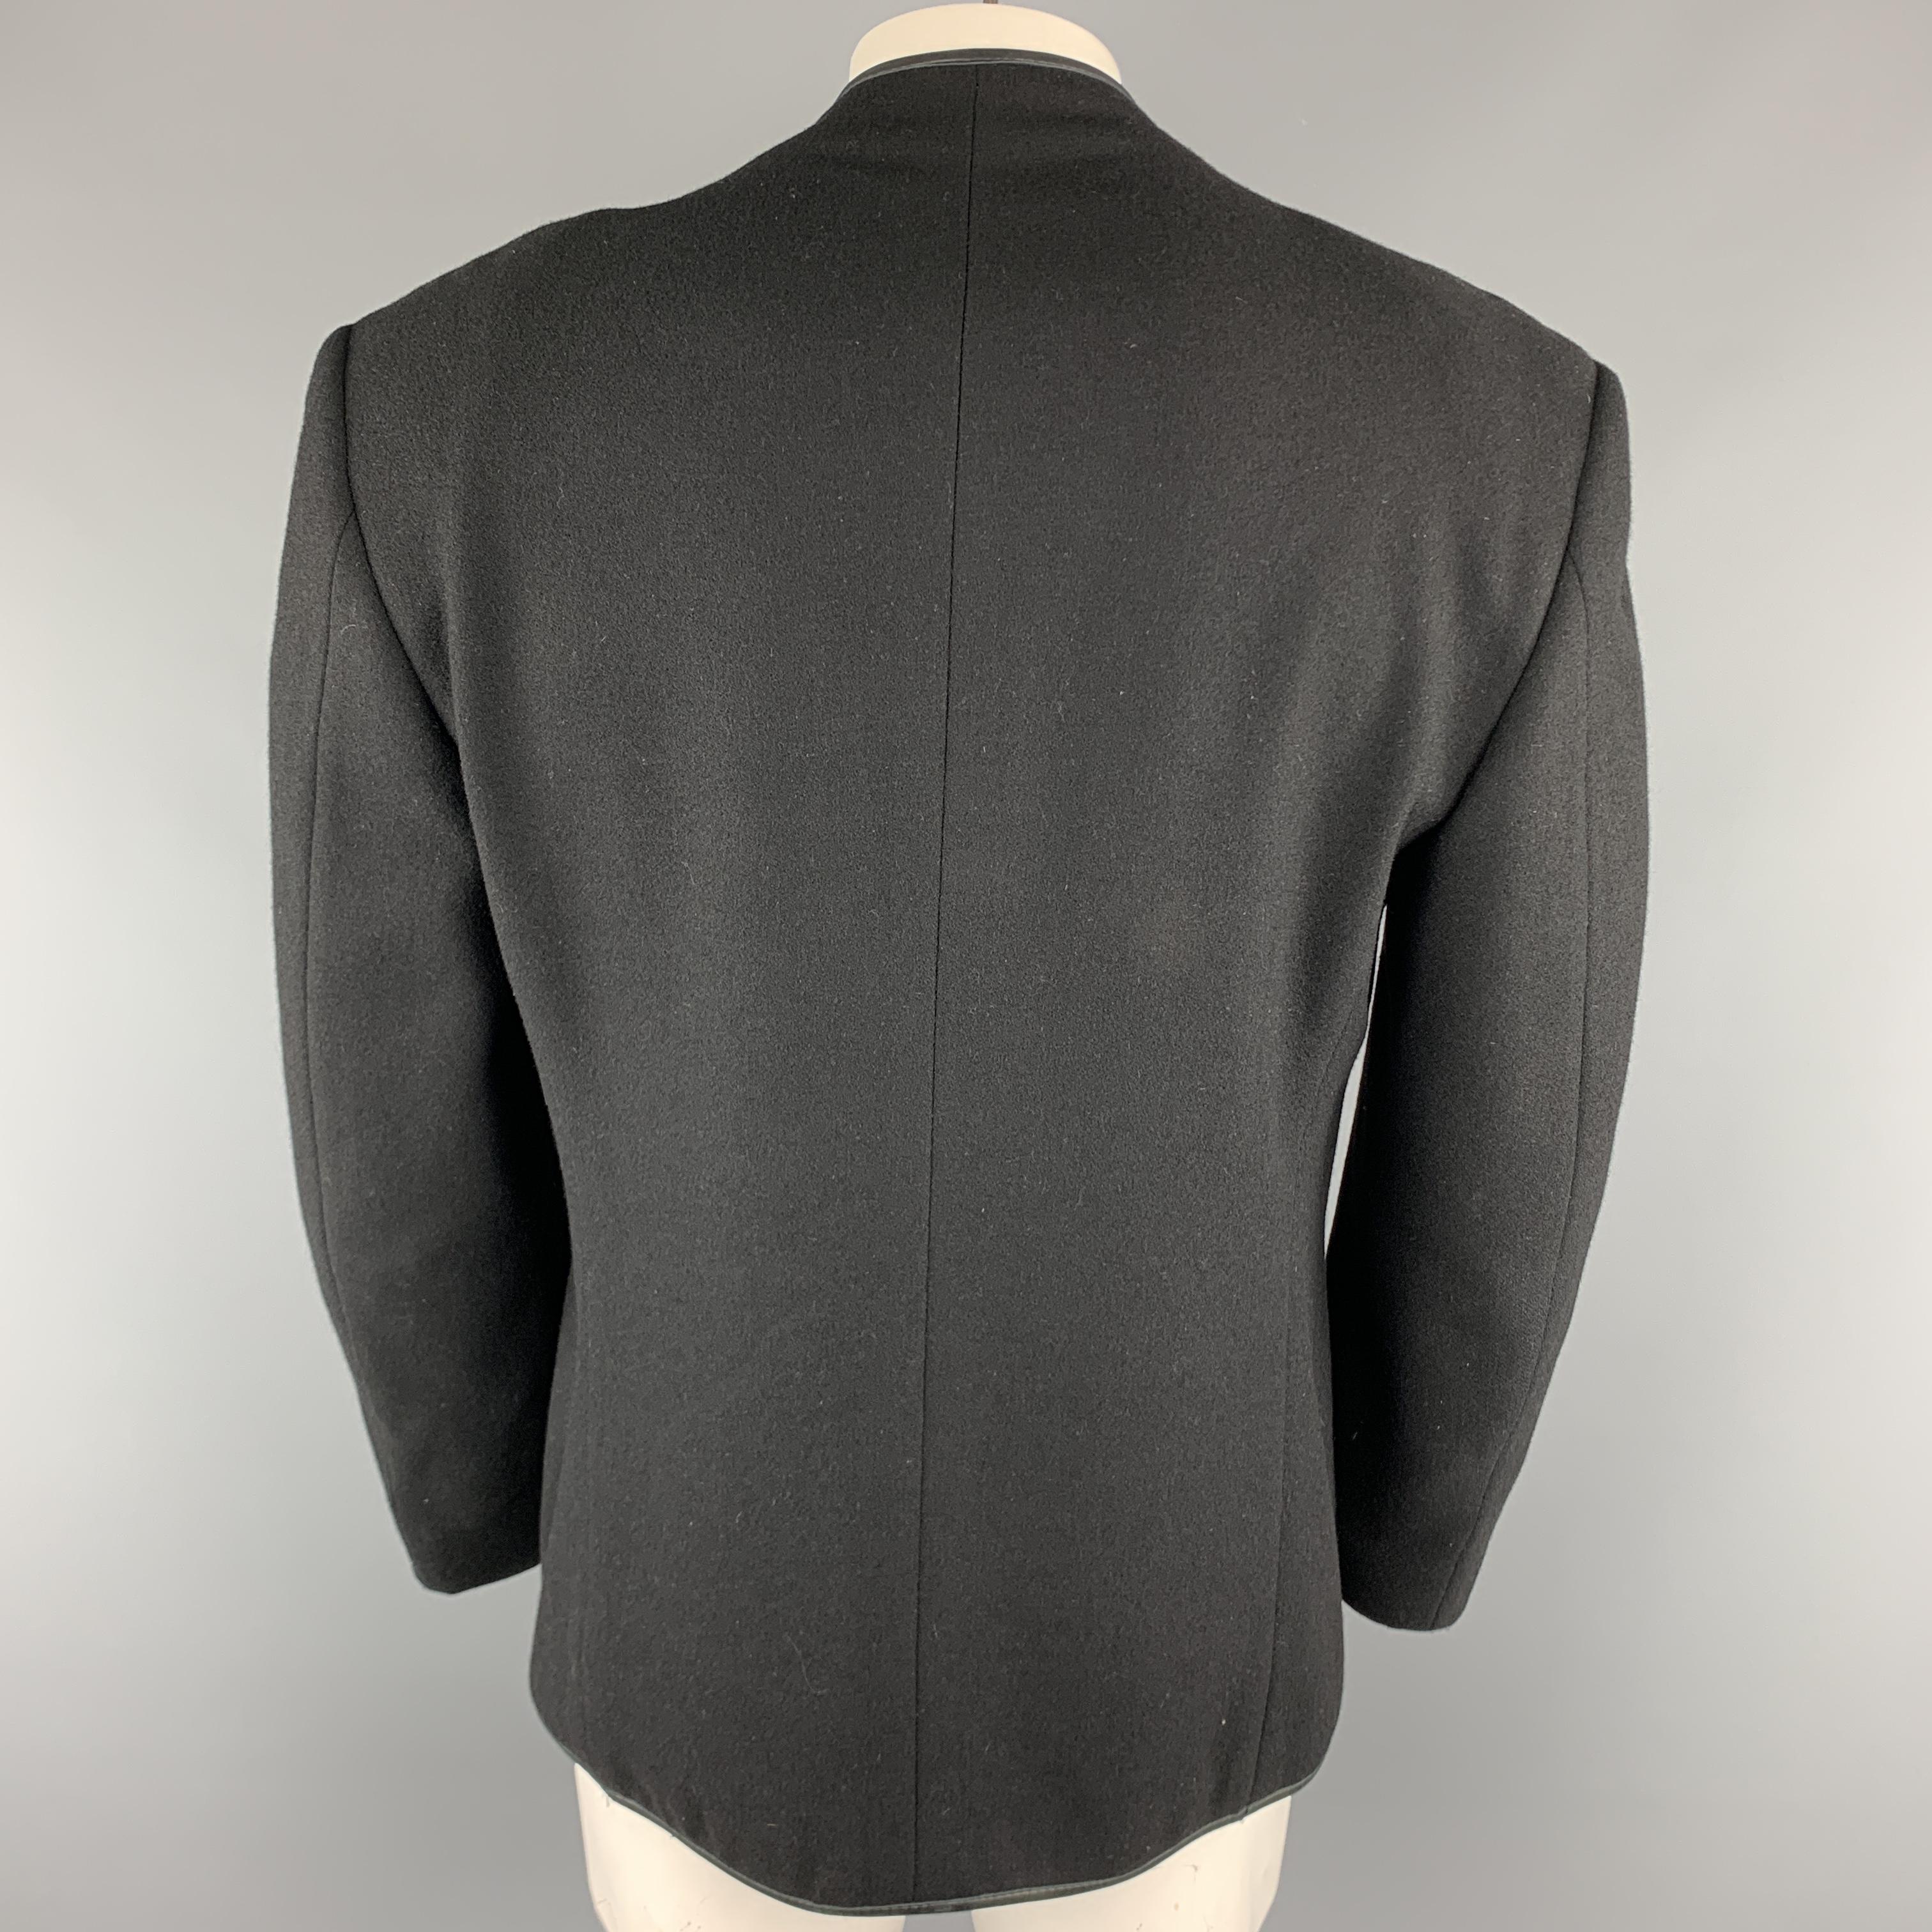 Men's THIERRY MUGLER Chest Size 42 Black Solid Wool Blend Snaps Jacket